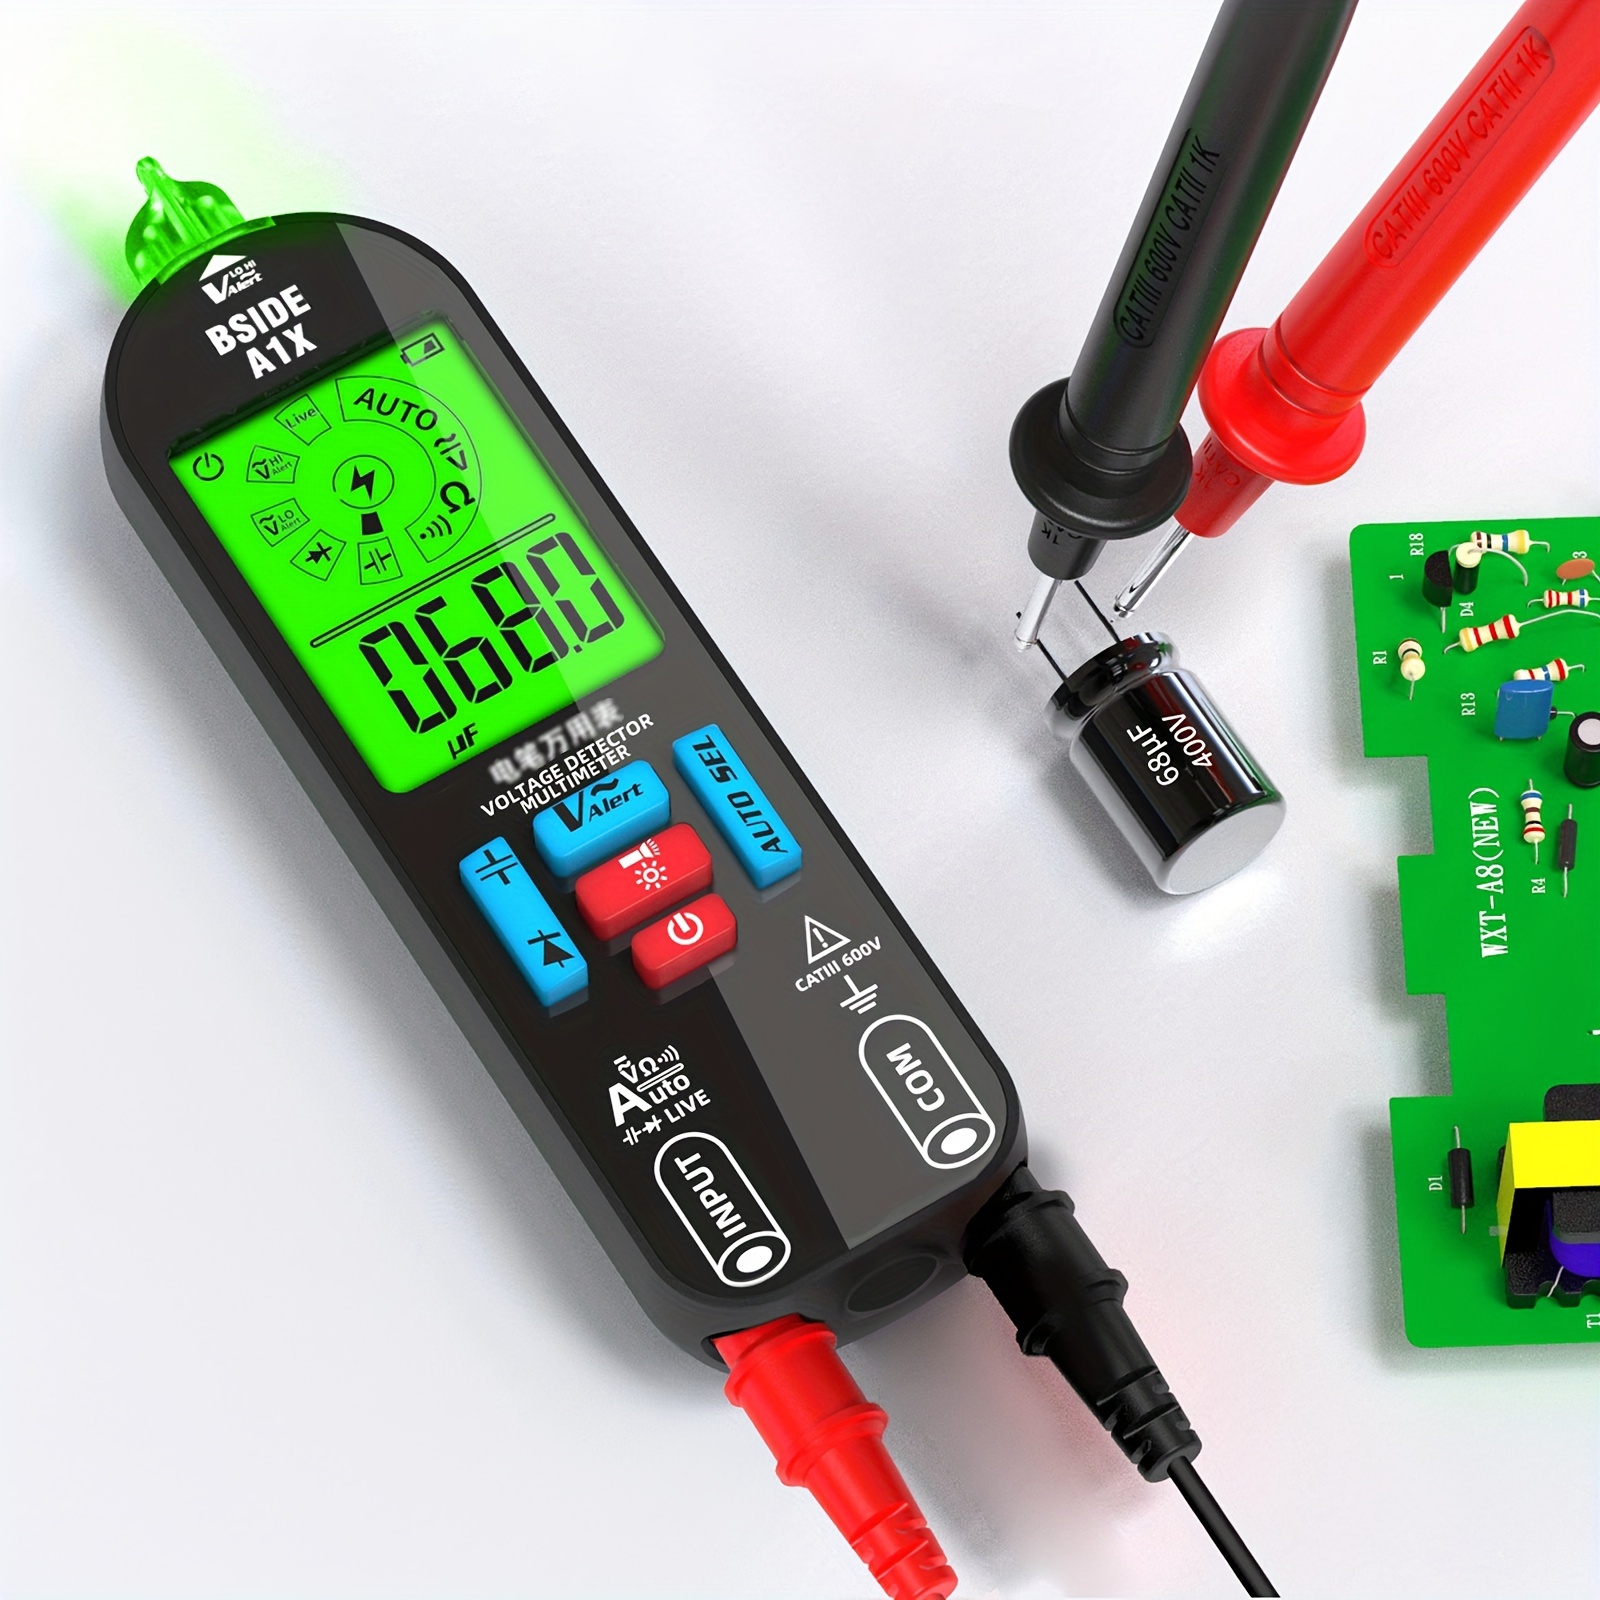 

Bside A1x Smart Digital Multimeter - Rechargeable, High-resolution Lcd Display With Red & Green Backlight, Auto-testing For Voltage, Resistance, Continuity & More